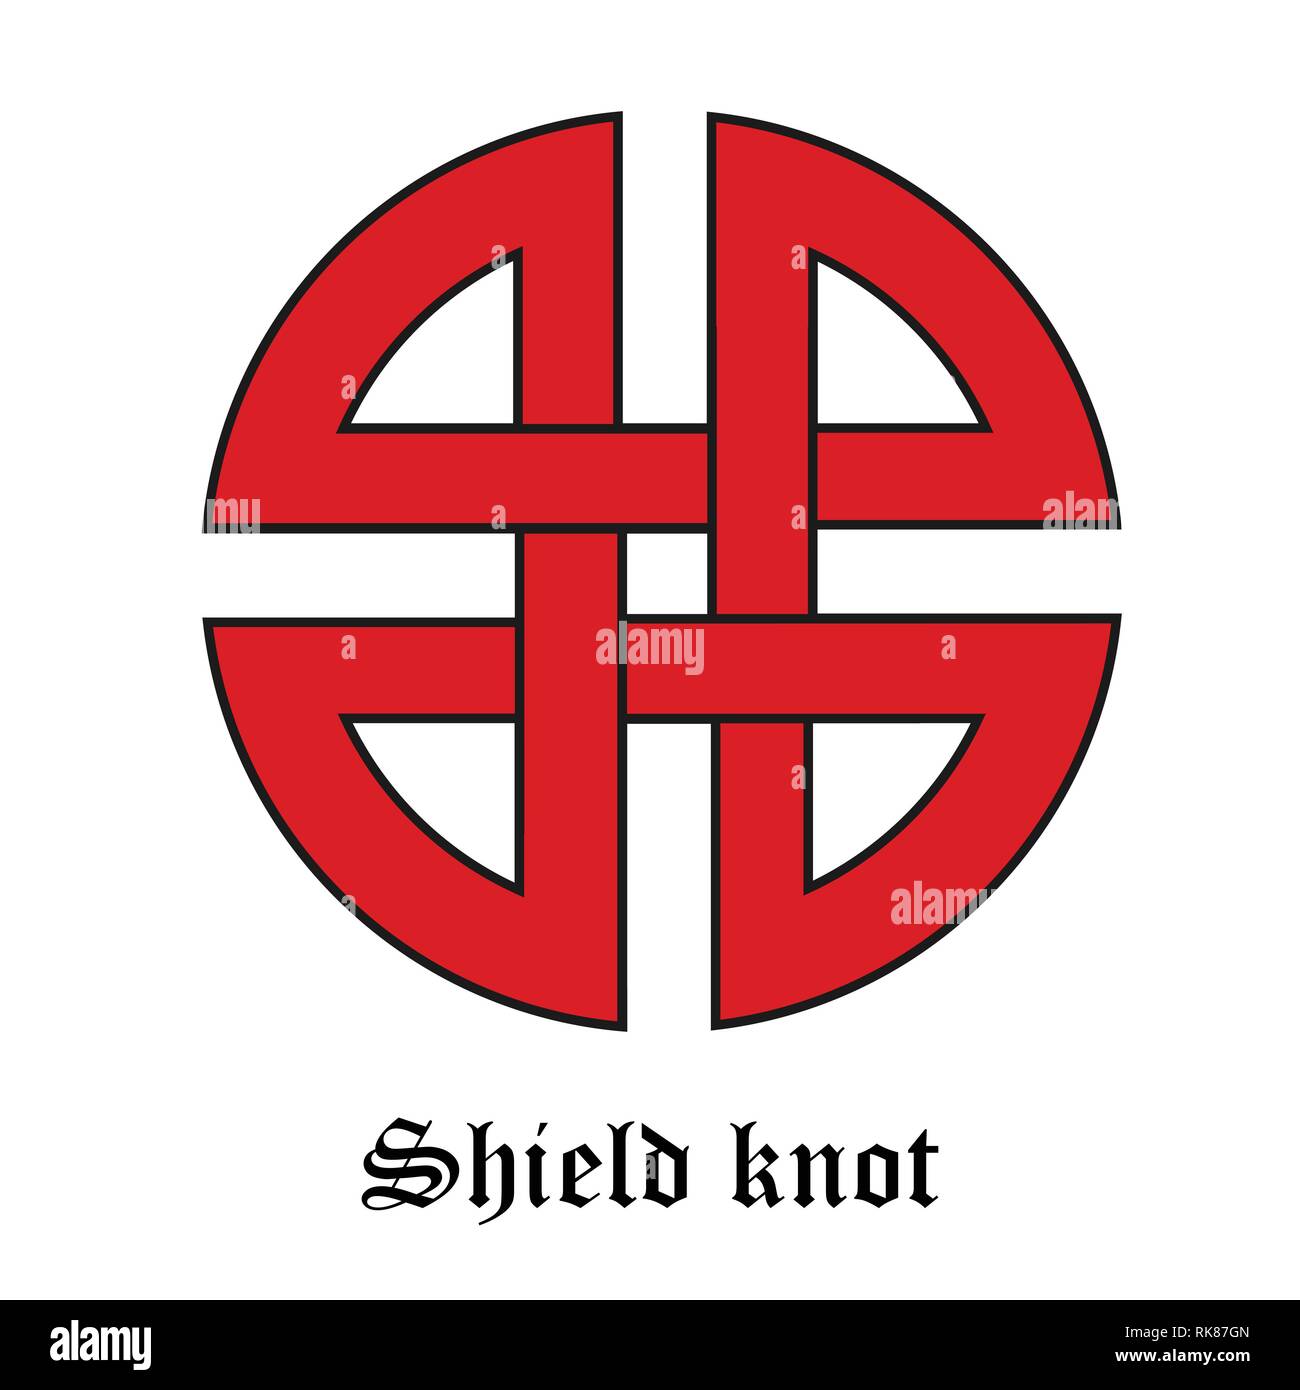 Celtic Shield Knot, Protection, Four corners knot, Norse, Viking